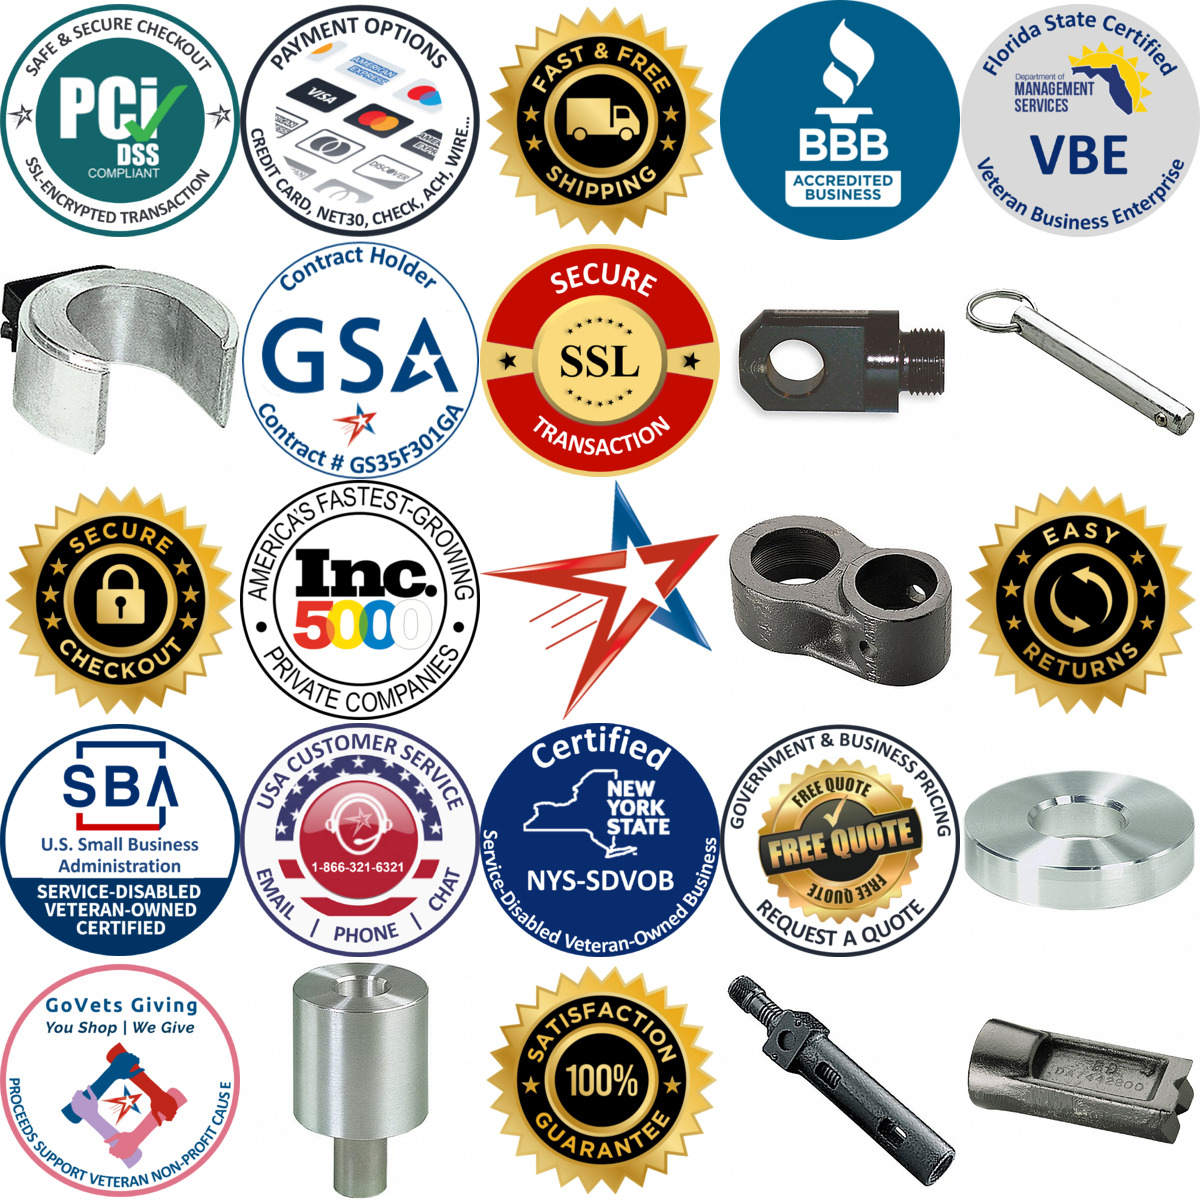 A selection of Hydraulic Ram Accessories products on GoVets